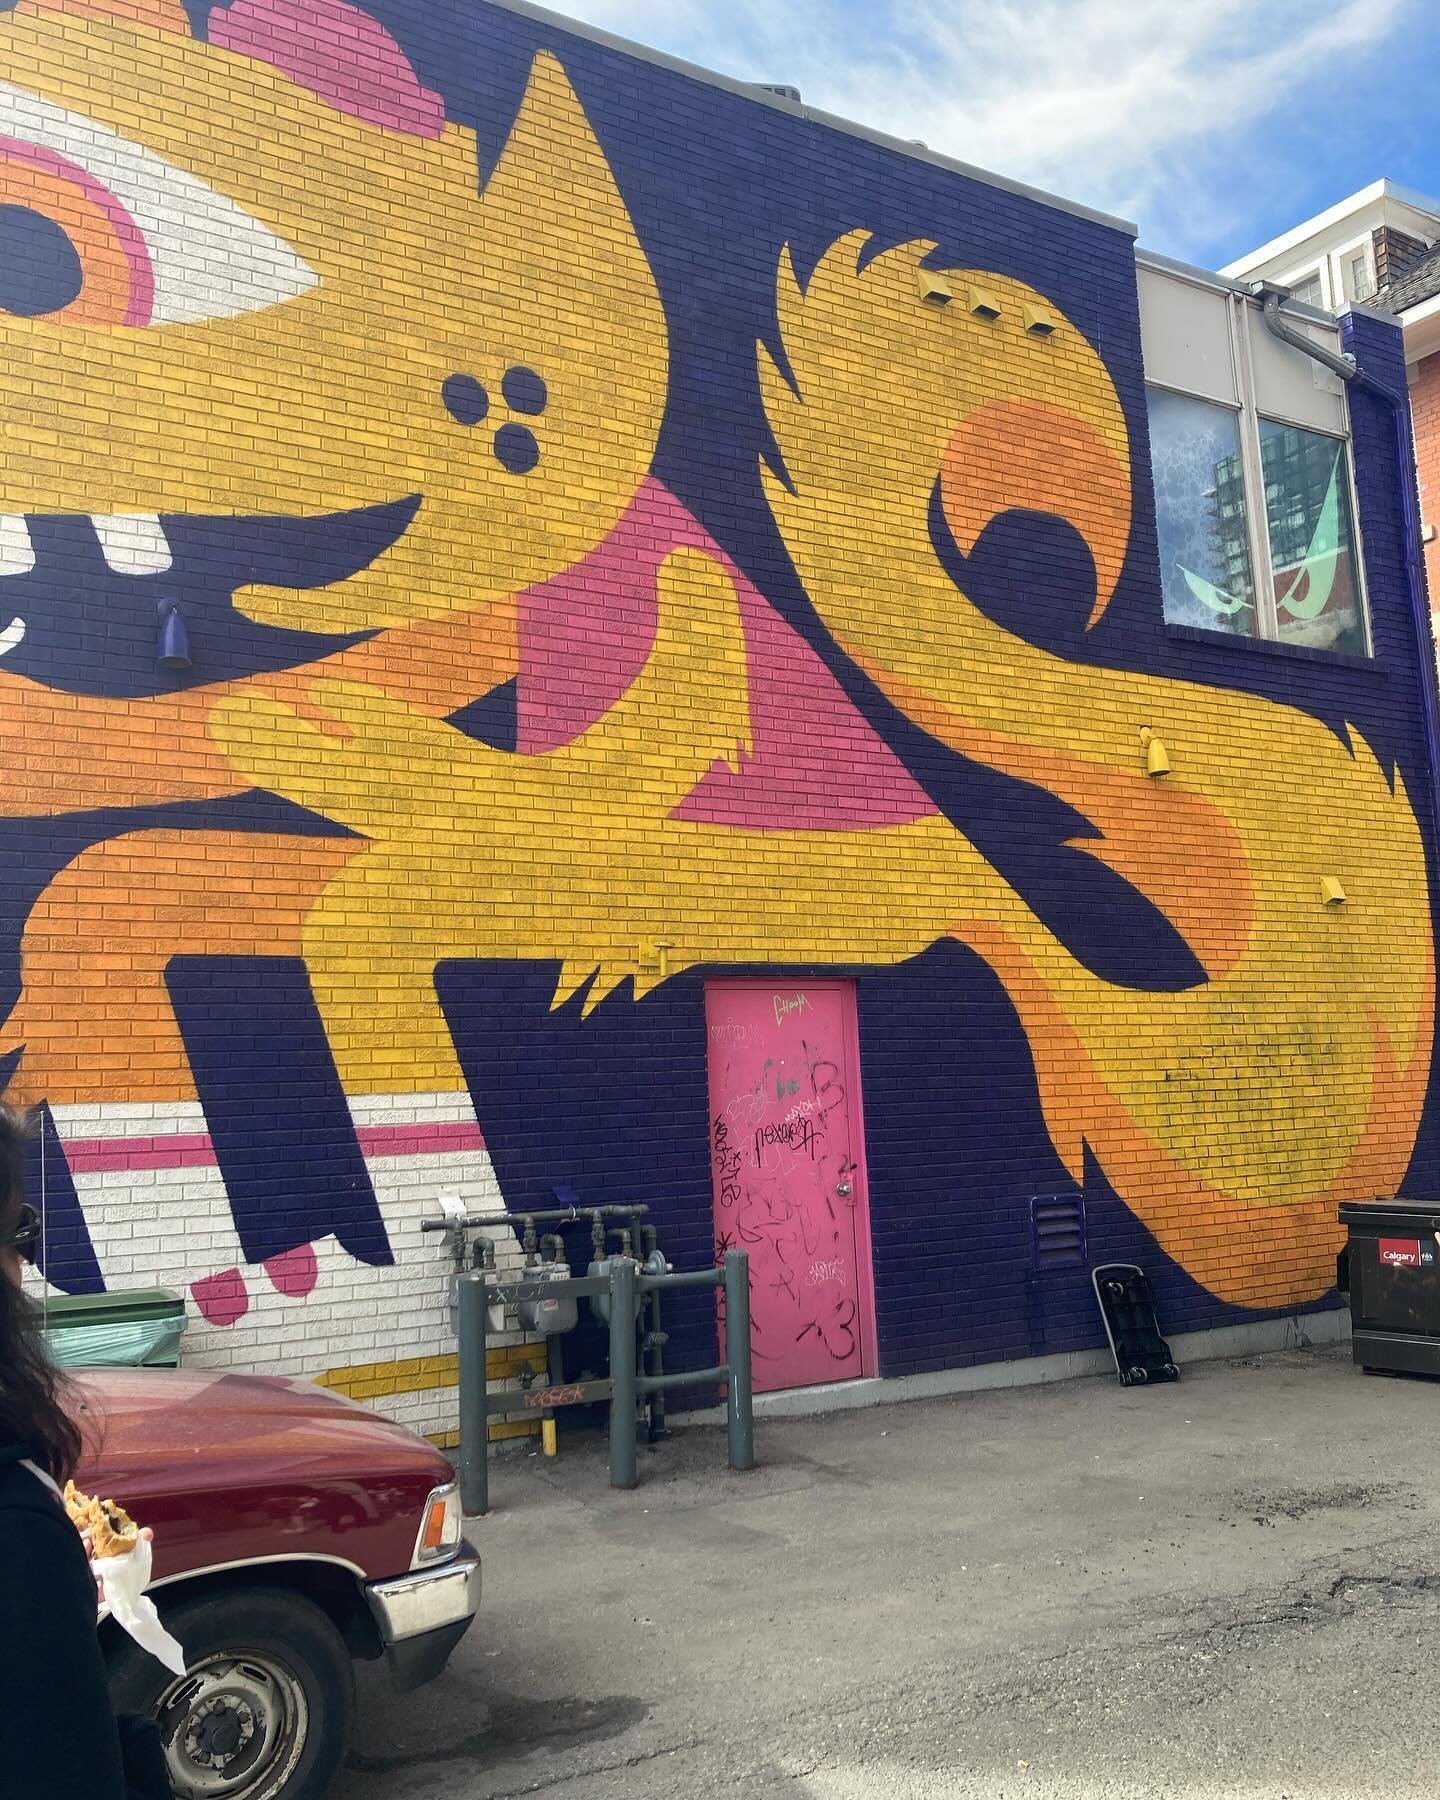 I recently went on a mural tour hosted by @yycbump. Calgary is full of beautiful murals and I would highly recommend checking them out. It&rsquo;s a great way to explore the city and see some amazing murals. They all have an interesting story behind 